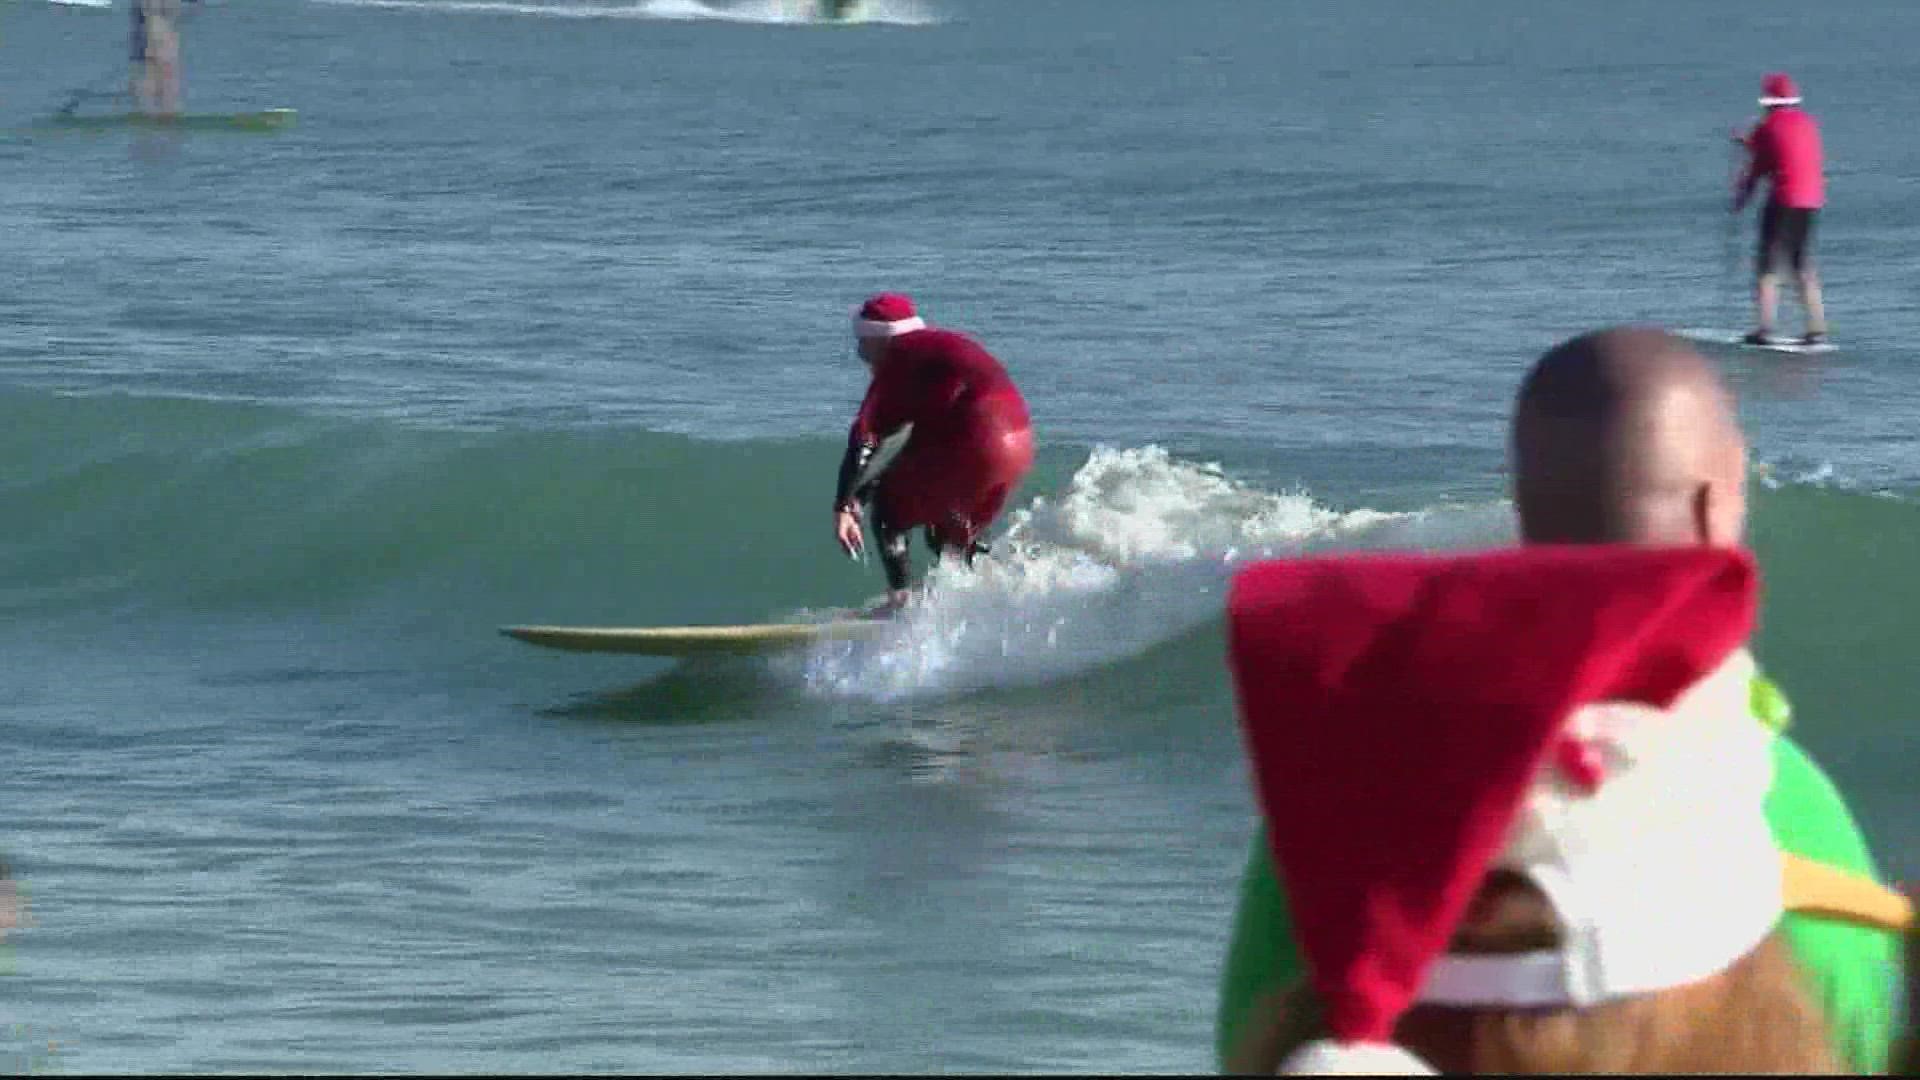 For the surfing Santas off Florida's central coast, the Atlantic Ocean felt more like the North Pole as temperatures on Saturday morning plunged to around freezing.